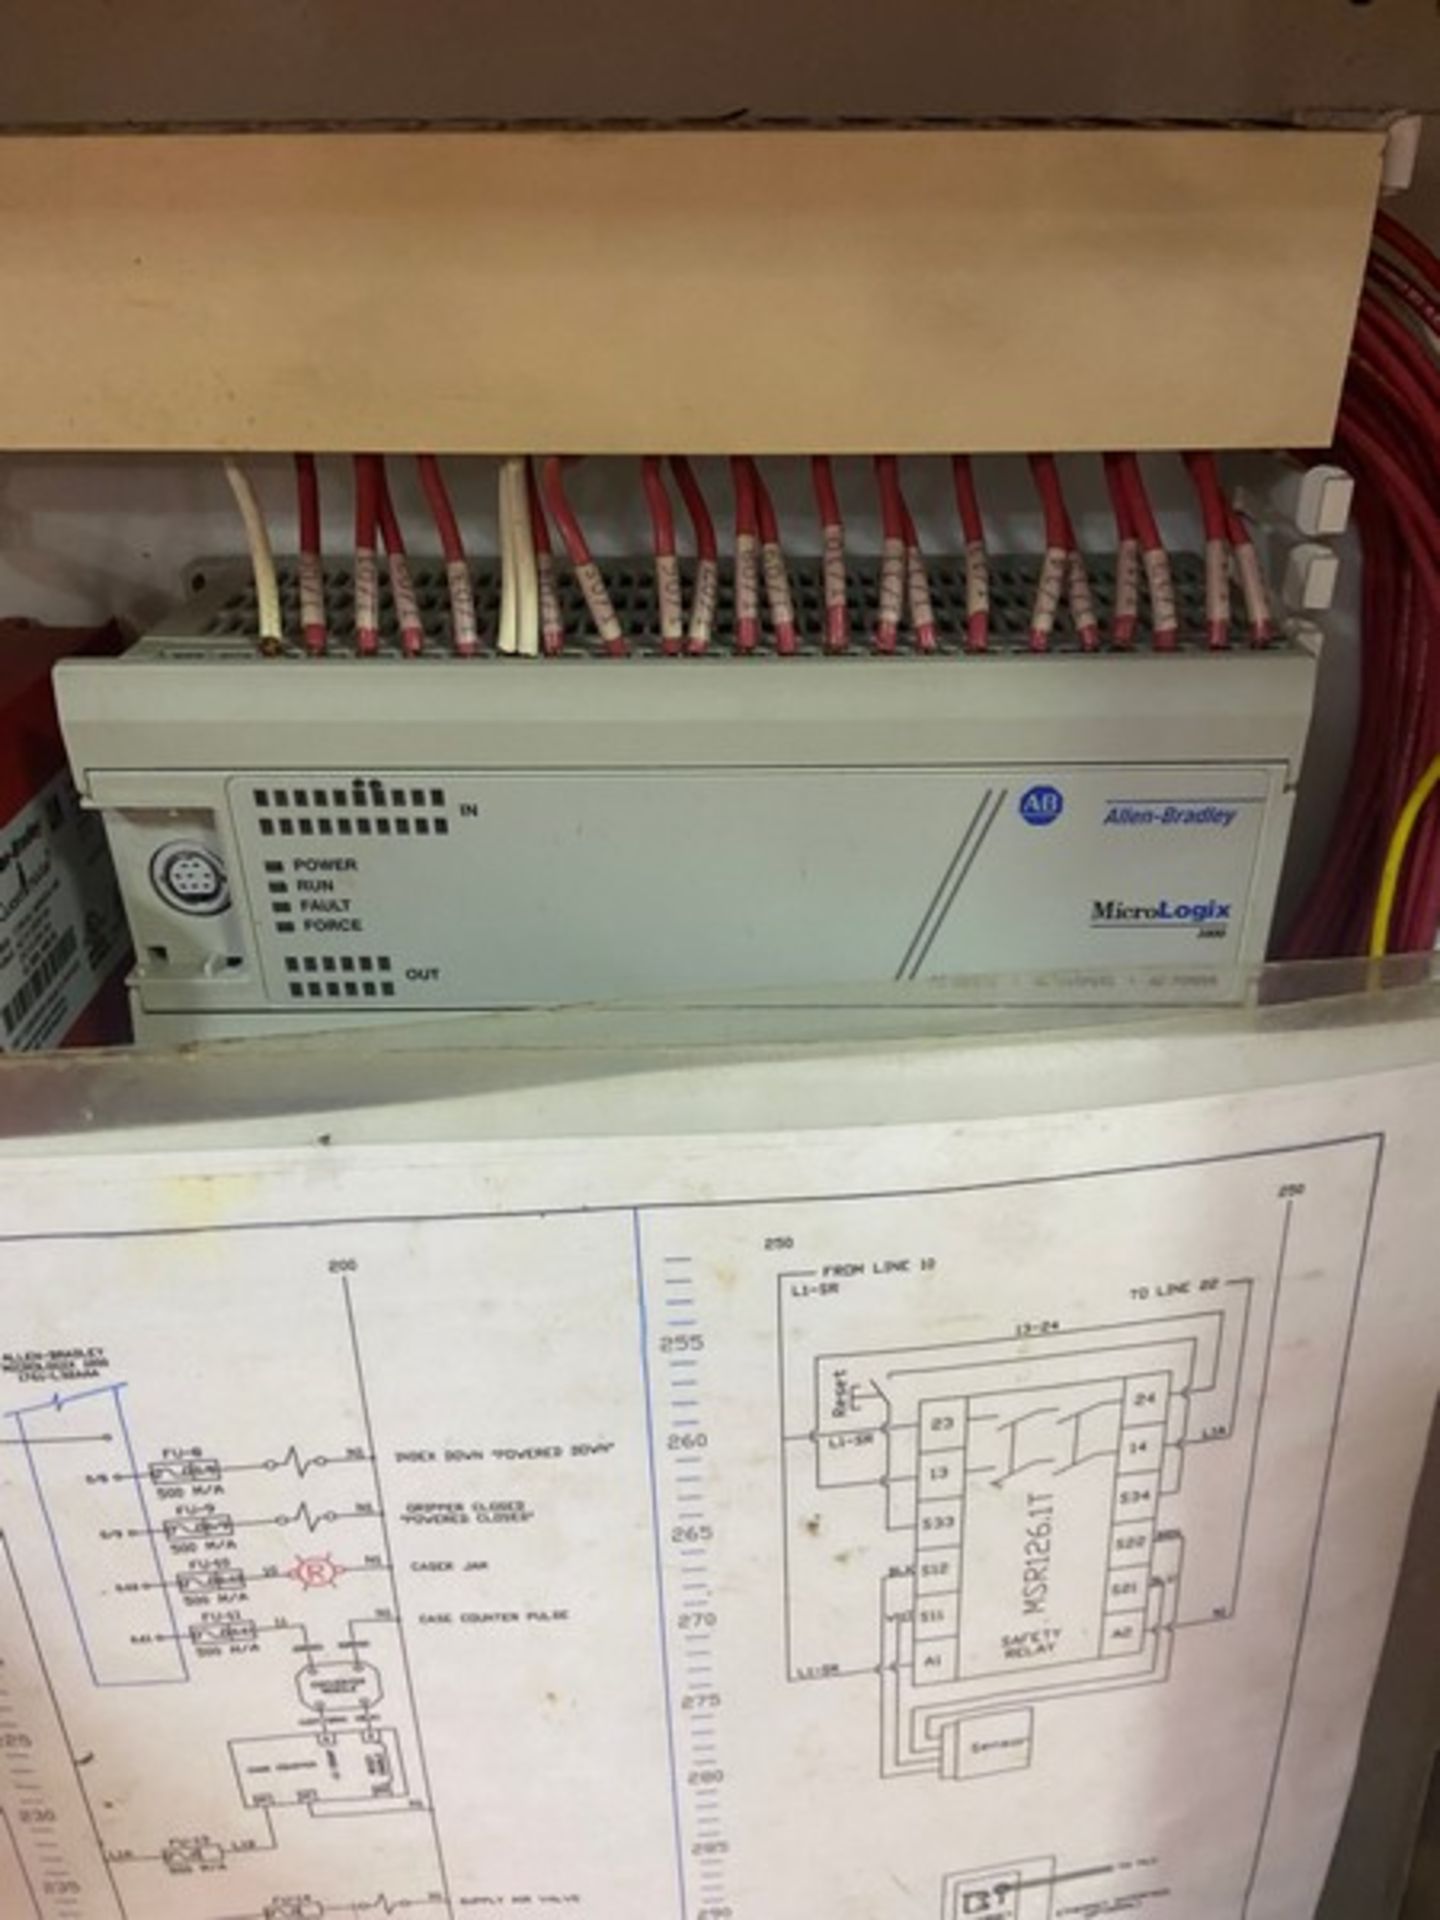 S/S Case Inverter, with Allen-Bradley Micro-Logix 1000 in Control Panel (LOCATED IN LOS ANGELES, CA) - Image 6 of 6